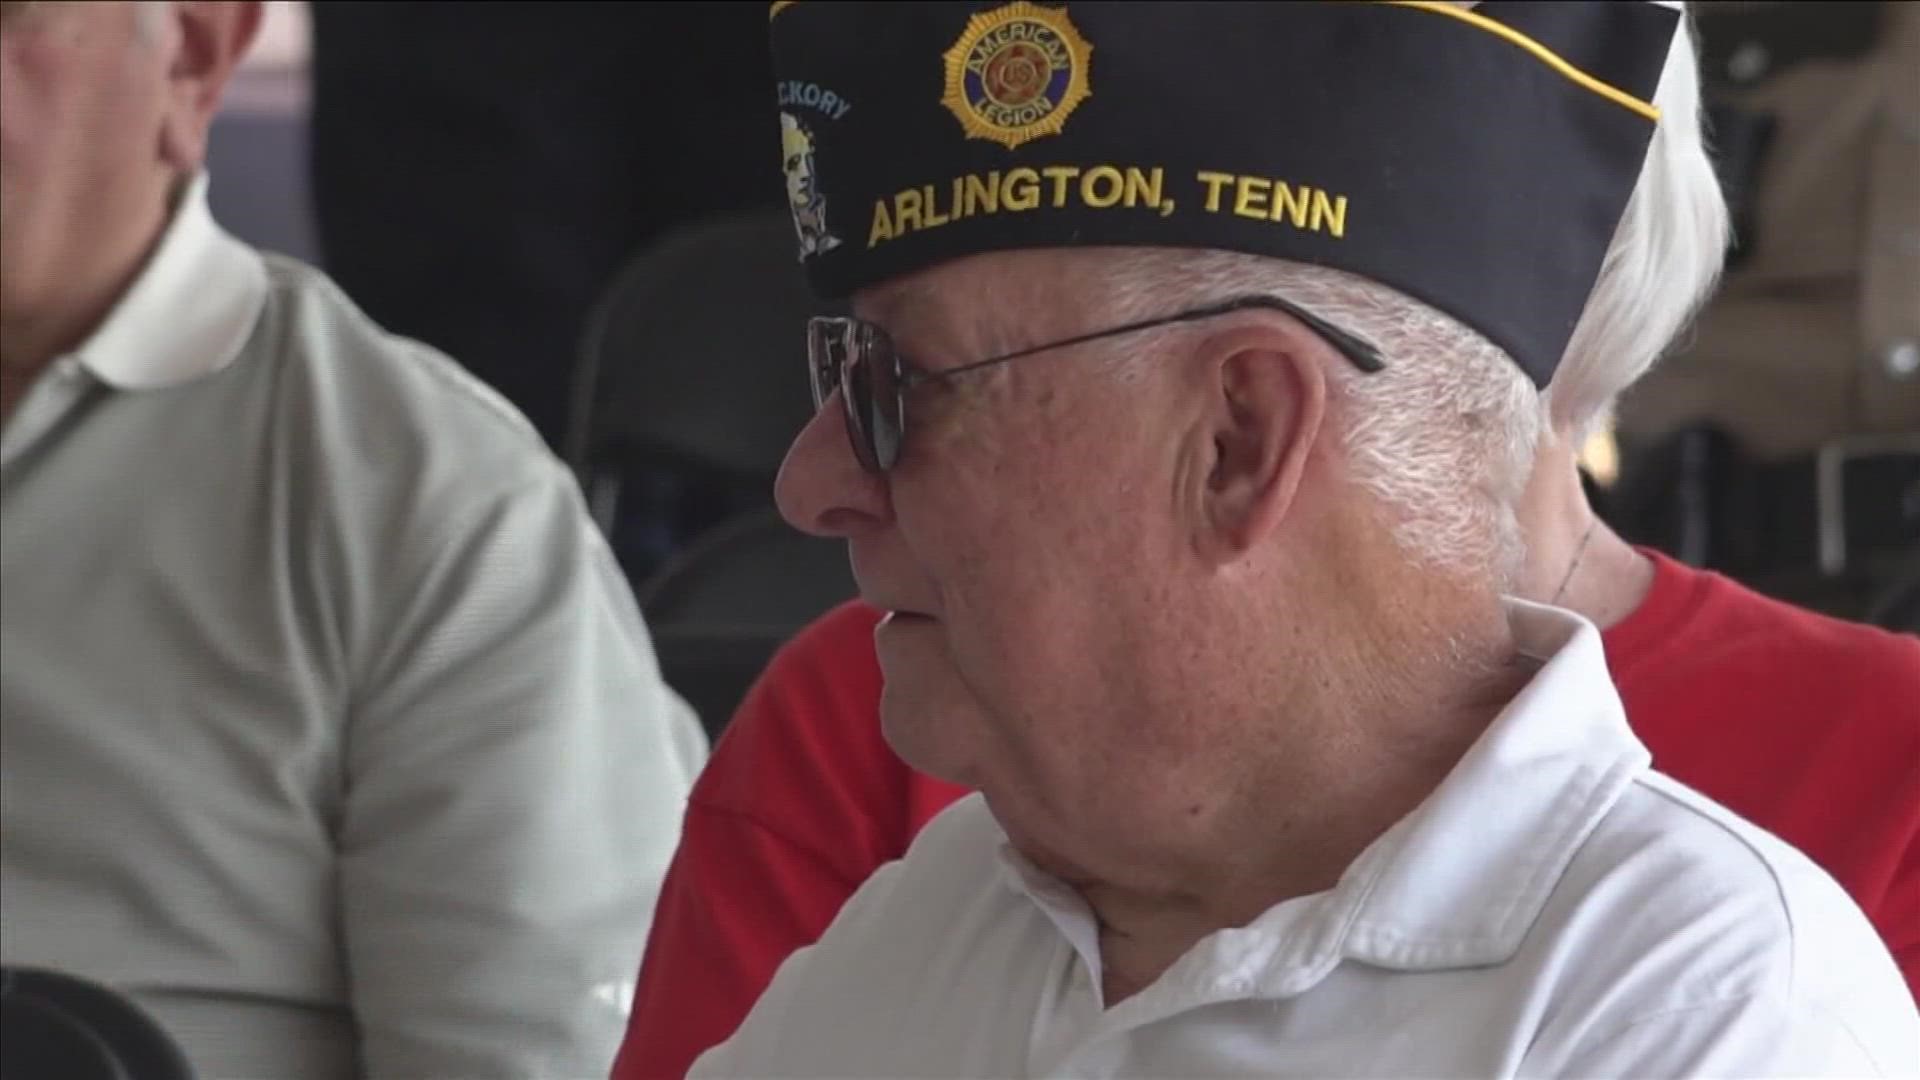 The closest veterans home to the Memphis area is now located in Humboldt, Tennessee. ABC24 will keep you updated on when this new veterans home is completed.